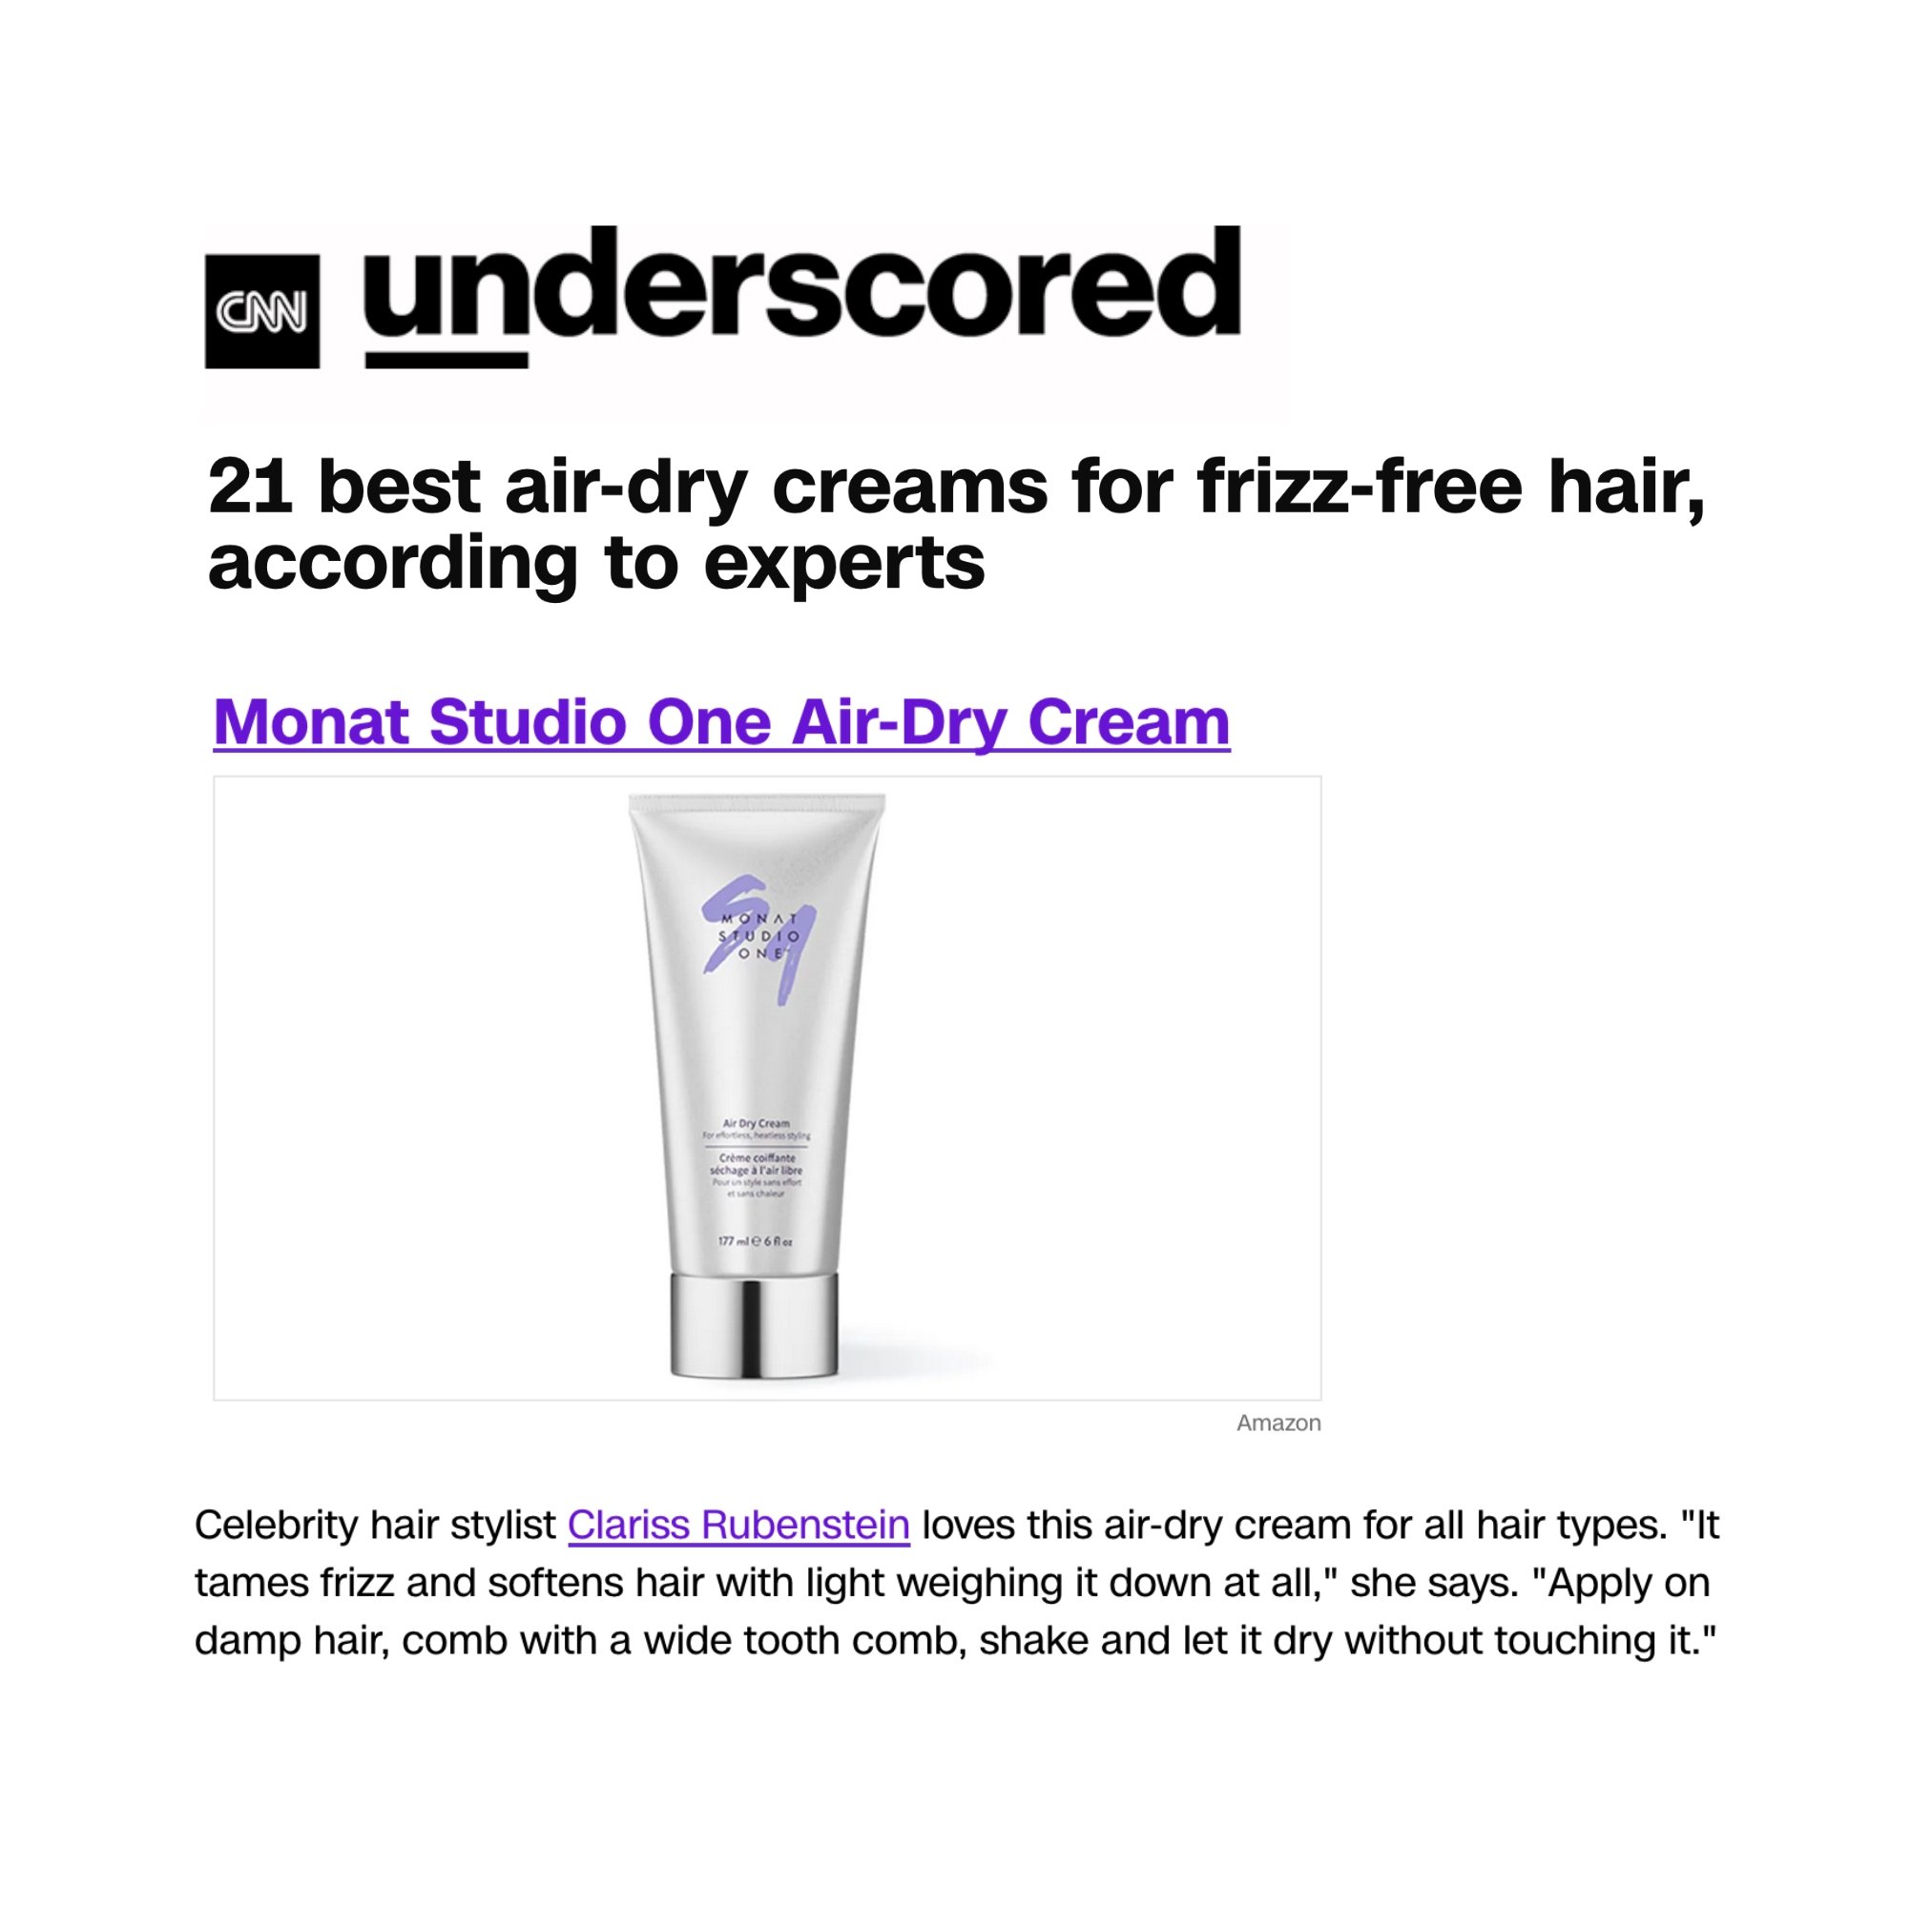 @cnnunderscored shares the best air-dry creams for frizz-free hair (summer goals!) including @monatofficial Studio One Air-Dry Cream, as recommended by celebrity hair stylist @clarissanya 👏🏻👏🏻